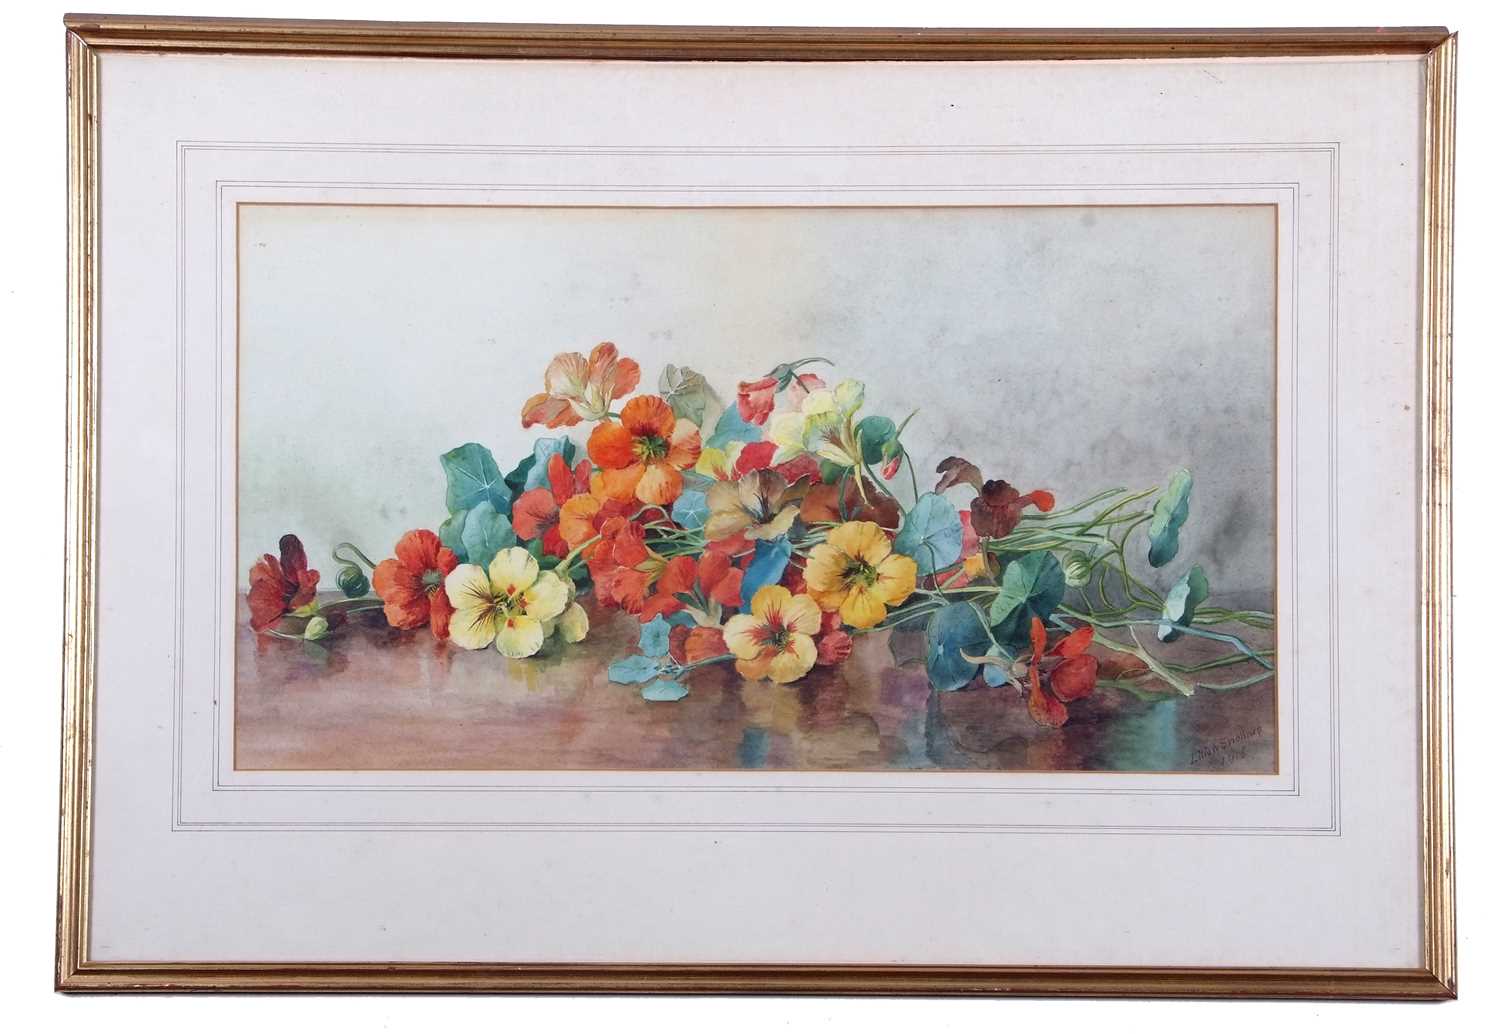 Lilian Snelling (British, 1879-1972), still life study of flowers, watercolour, signed and dated - Image 2 of 3